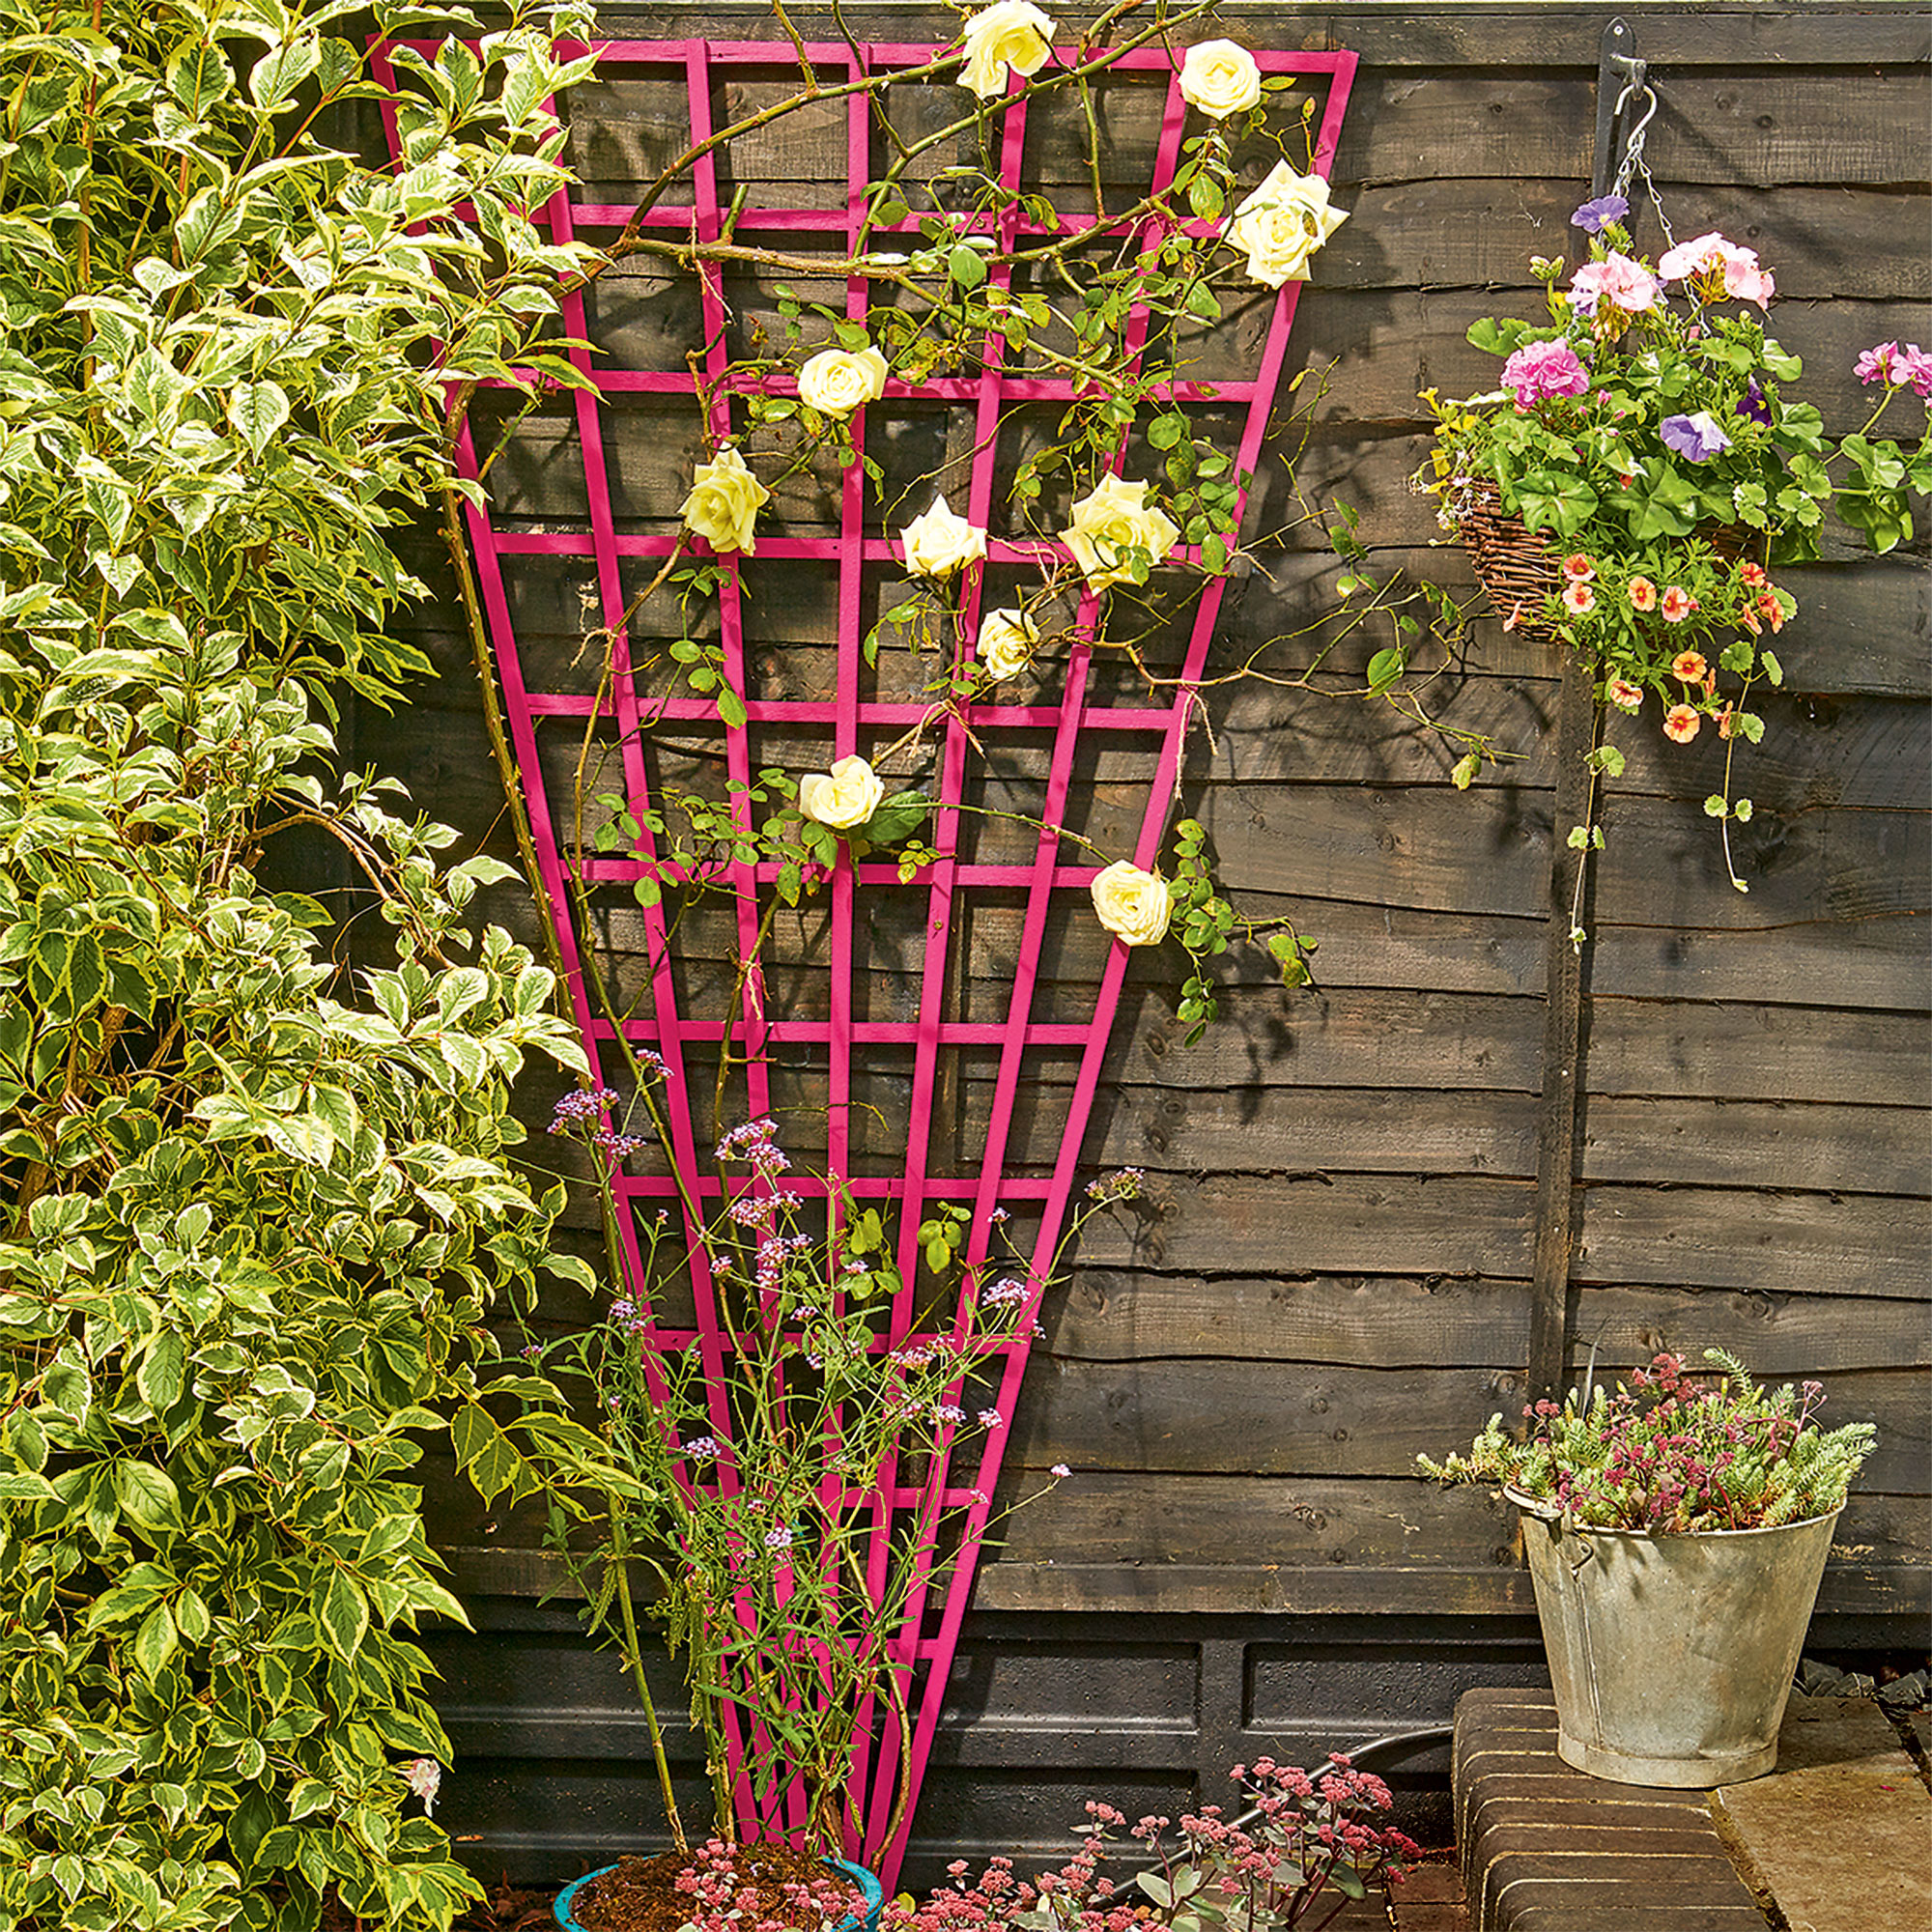 Pink trellis with yellow climbing roses against garden fence